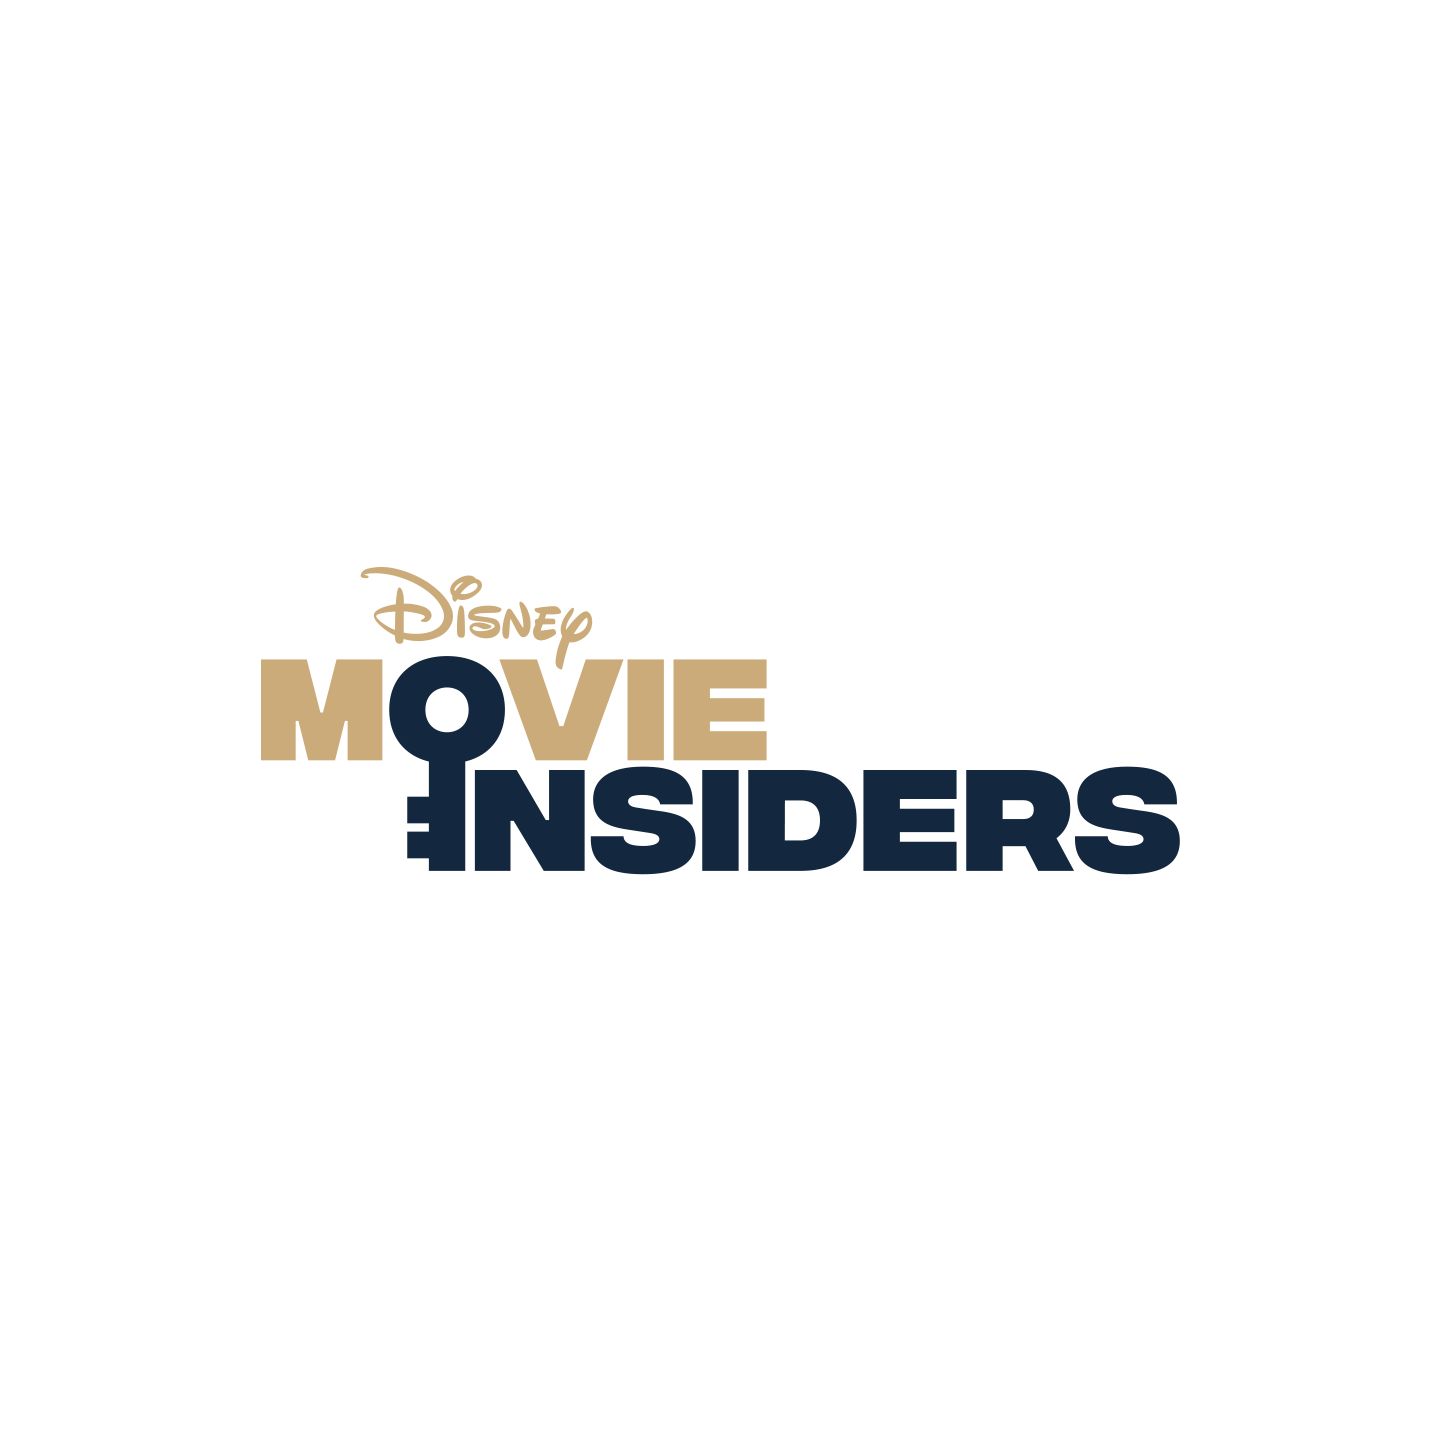 Disney Movie Insiders Presents - THE PROUD FAMILY LOUDER AND PROUDER - "The Proud Family" is back and we're talking to the show's stars and Executive Producers. LISTEN NOW